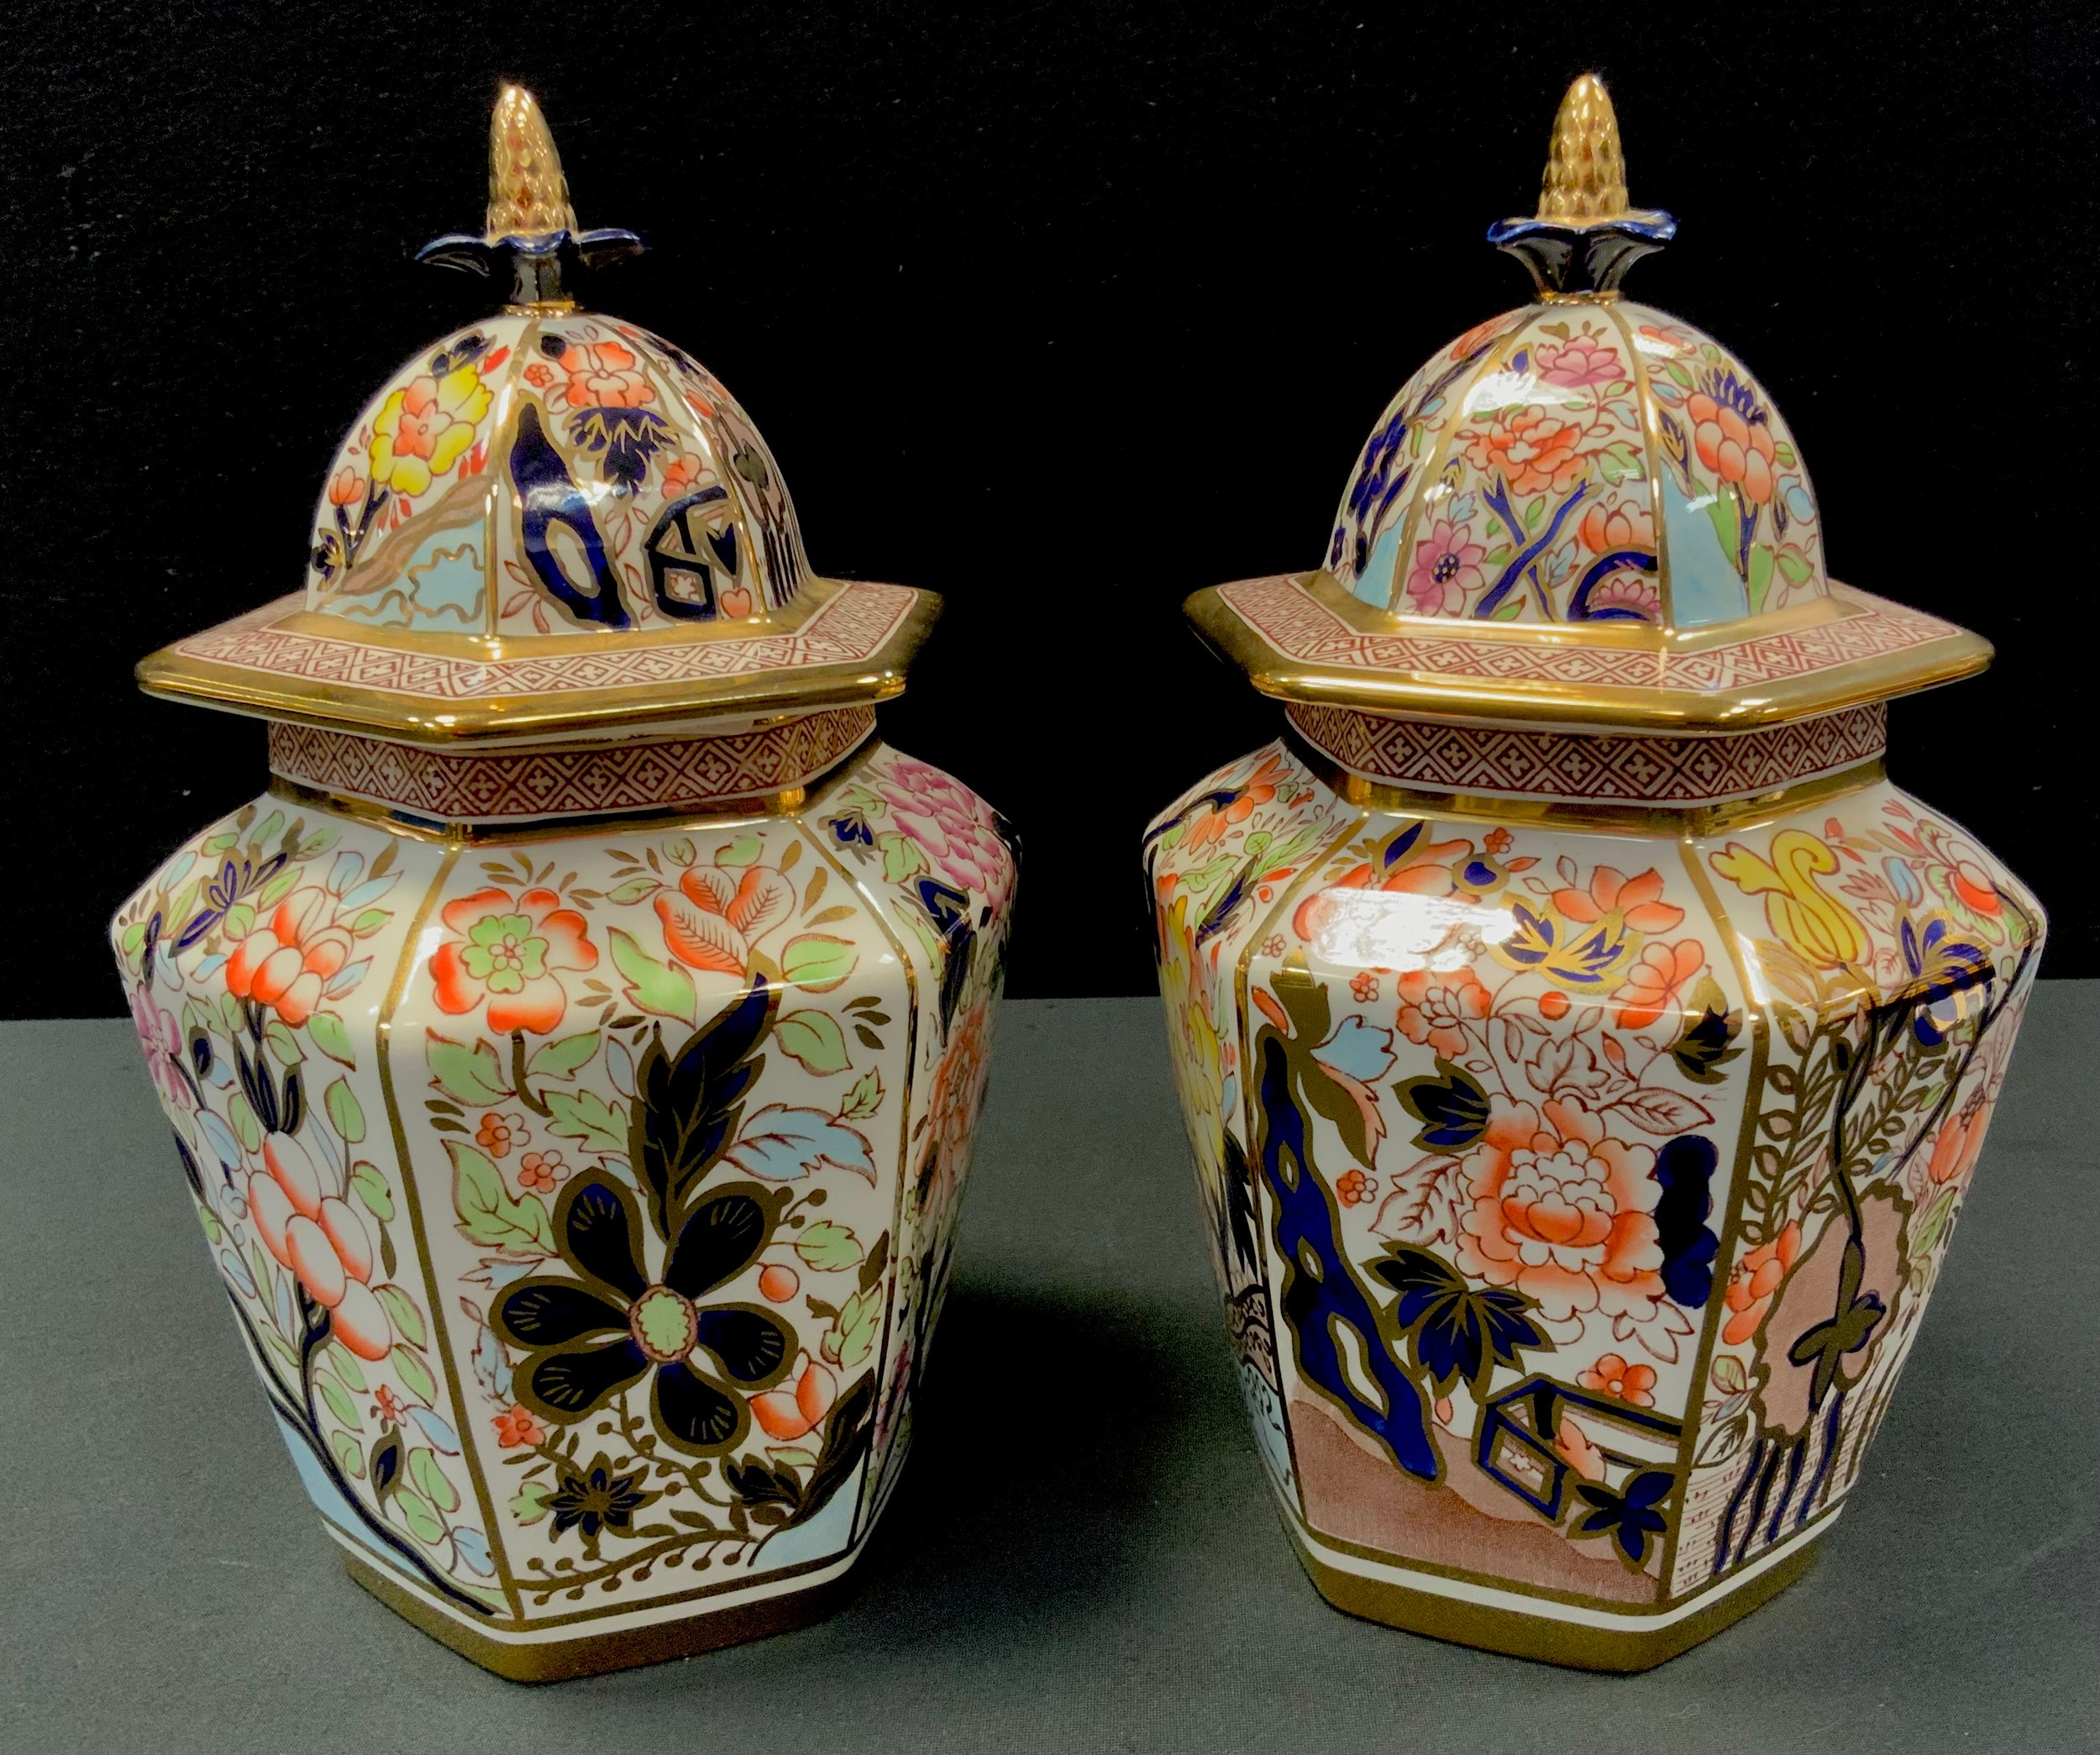 A pair of Masons Orange Siam limited edition temple jars and covers, 24cm high, edition of 2000